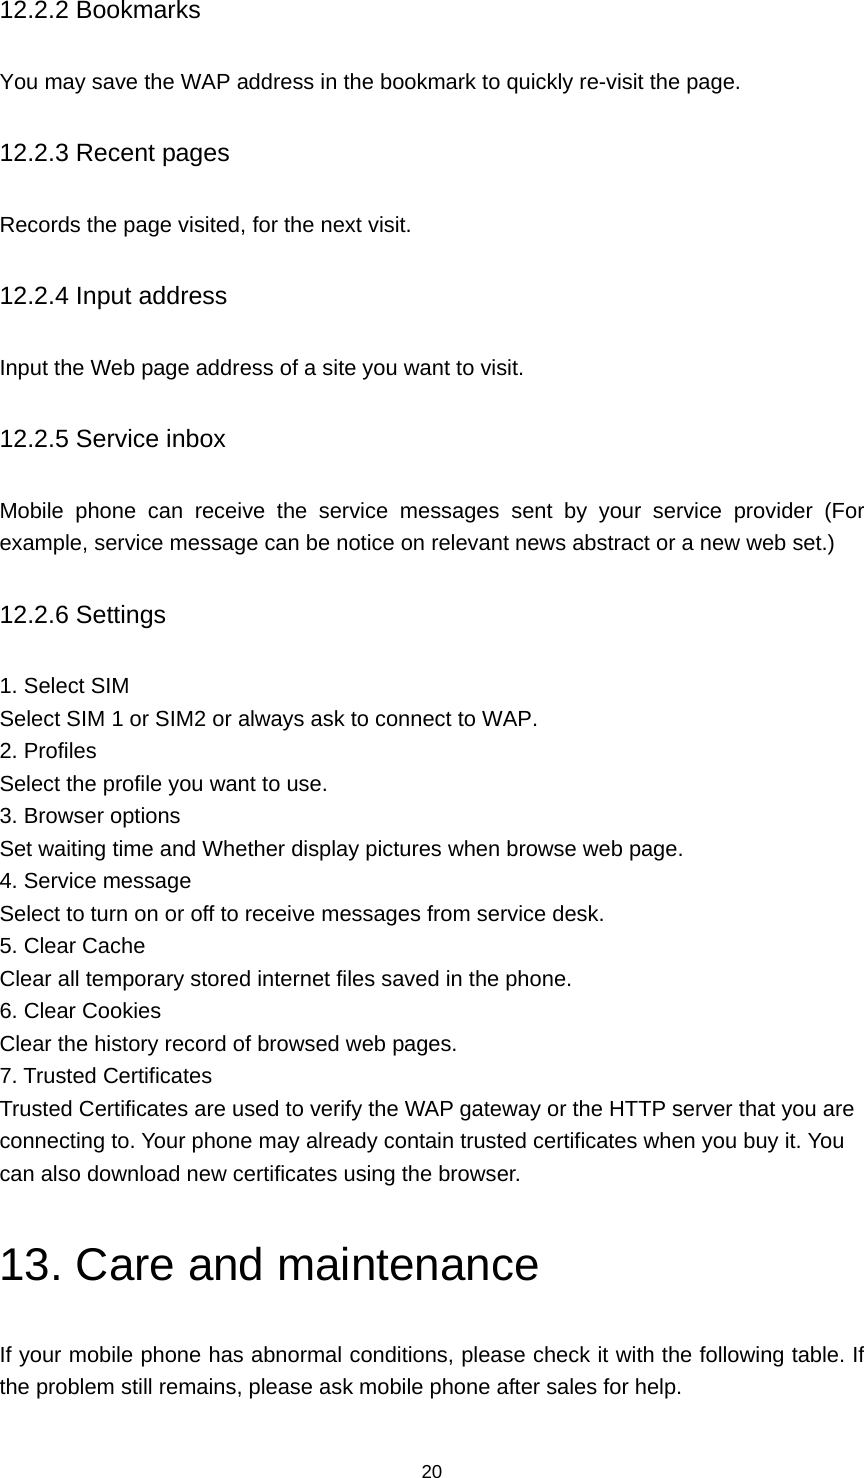 20 12.2.2 Bookmarks You may save the WAP address in the bookmark to quickly re-visit the page. 12.2.3 Recent pages Records the page visited, for the next visit. 12.2.4 Input address Input the Web page address of a site you want to visit. 12.2.5 Service inbox Mobile phone can receive the service messages sent by your service provider (For example, service message can be notice on relevant news abstract or a new web set.) 12.2.6 Settings 1. Select SIM Select SIM 1 or SIM2 or always ask to connect to WAP. 2. Profiles Select the profile you want to use. 3. Browser options Set waiting time and Whether display pictures when browse web page. 4. Service message Select to turn on or off to receive messages from service desk. 5. Clear Cache Clear all temporary stored internet files saved in the phone. 6. Clear Cookies Clear the history record of browsed web pages. 7. Trusted Certificates Trusted Certificates are used to verify the WAP gateway or the HTTP server that you are connecting to. Your phone may already contain trusted certificates when you buy it. You can also download new certificates using the browser. 13. Care and maintenance If your mobile phone has abnormal conditions, please check it with the following table. If the problem still remains, please ask mobile phone after sales for help. 